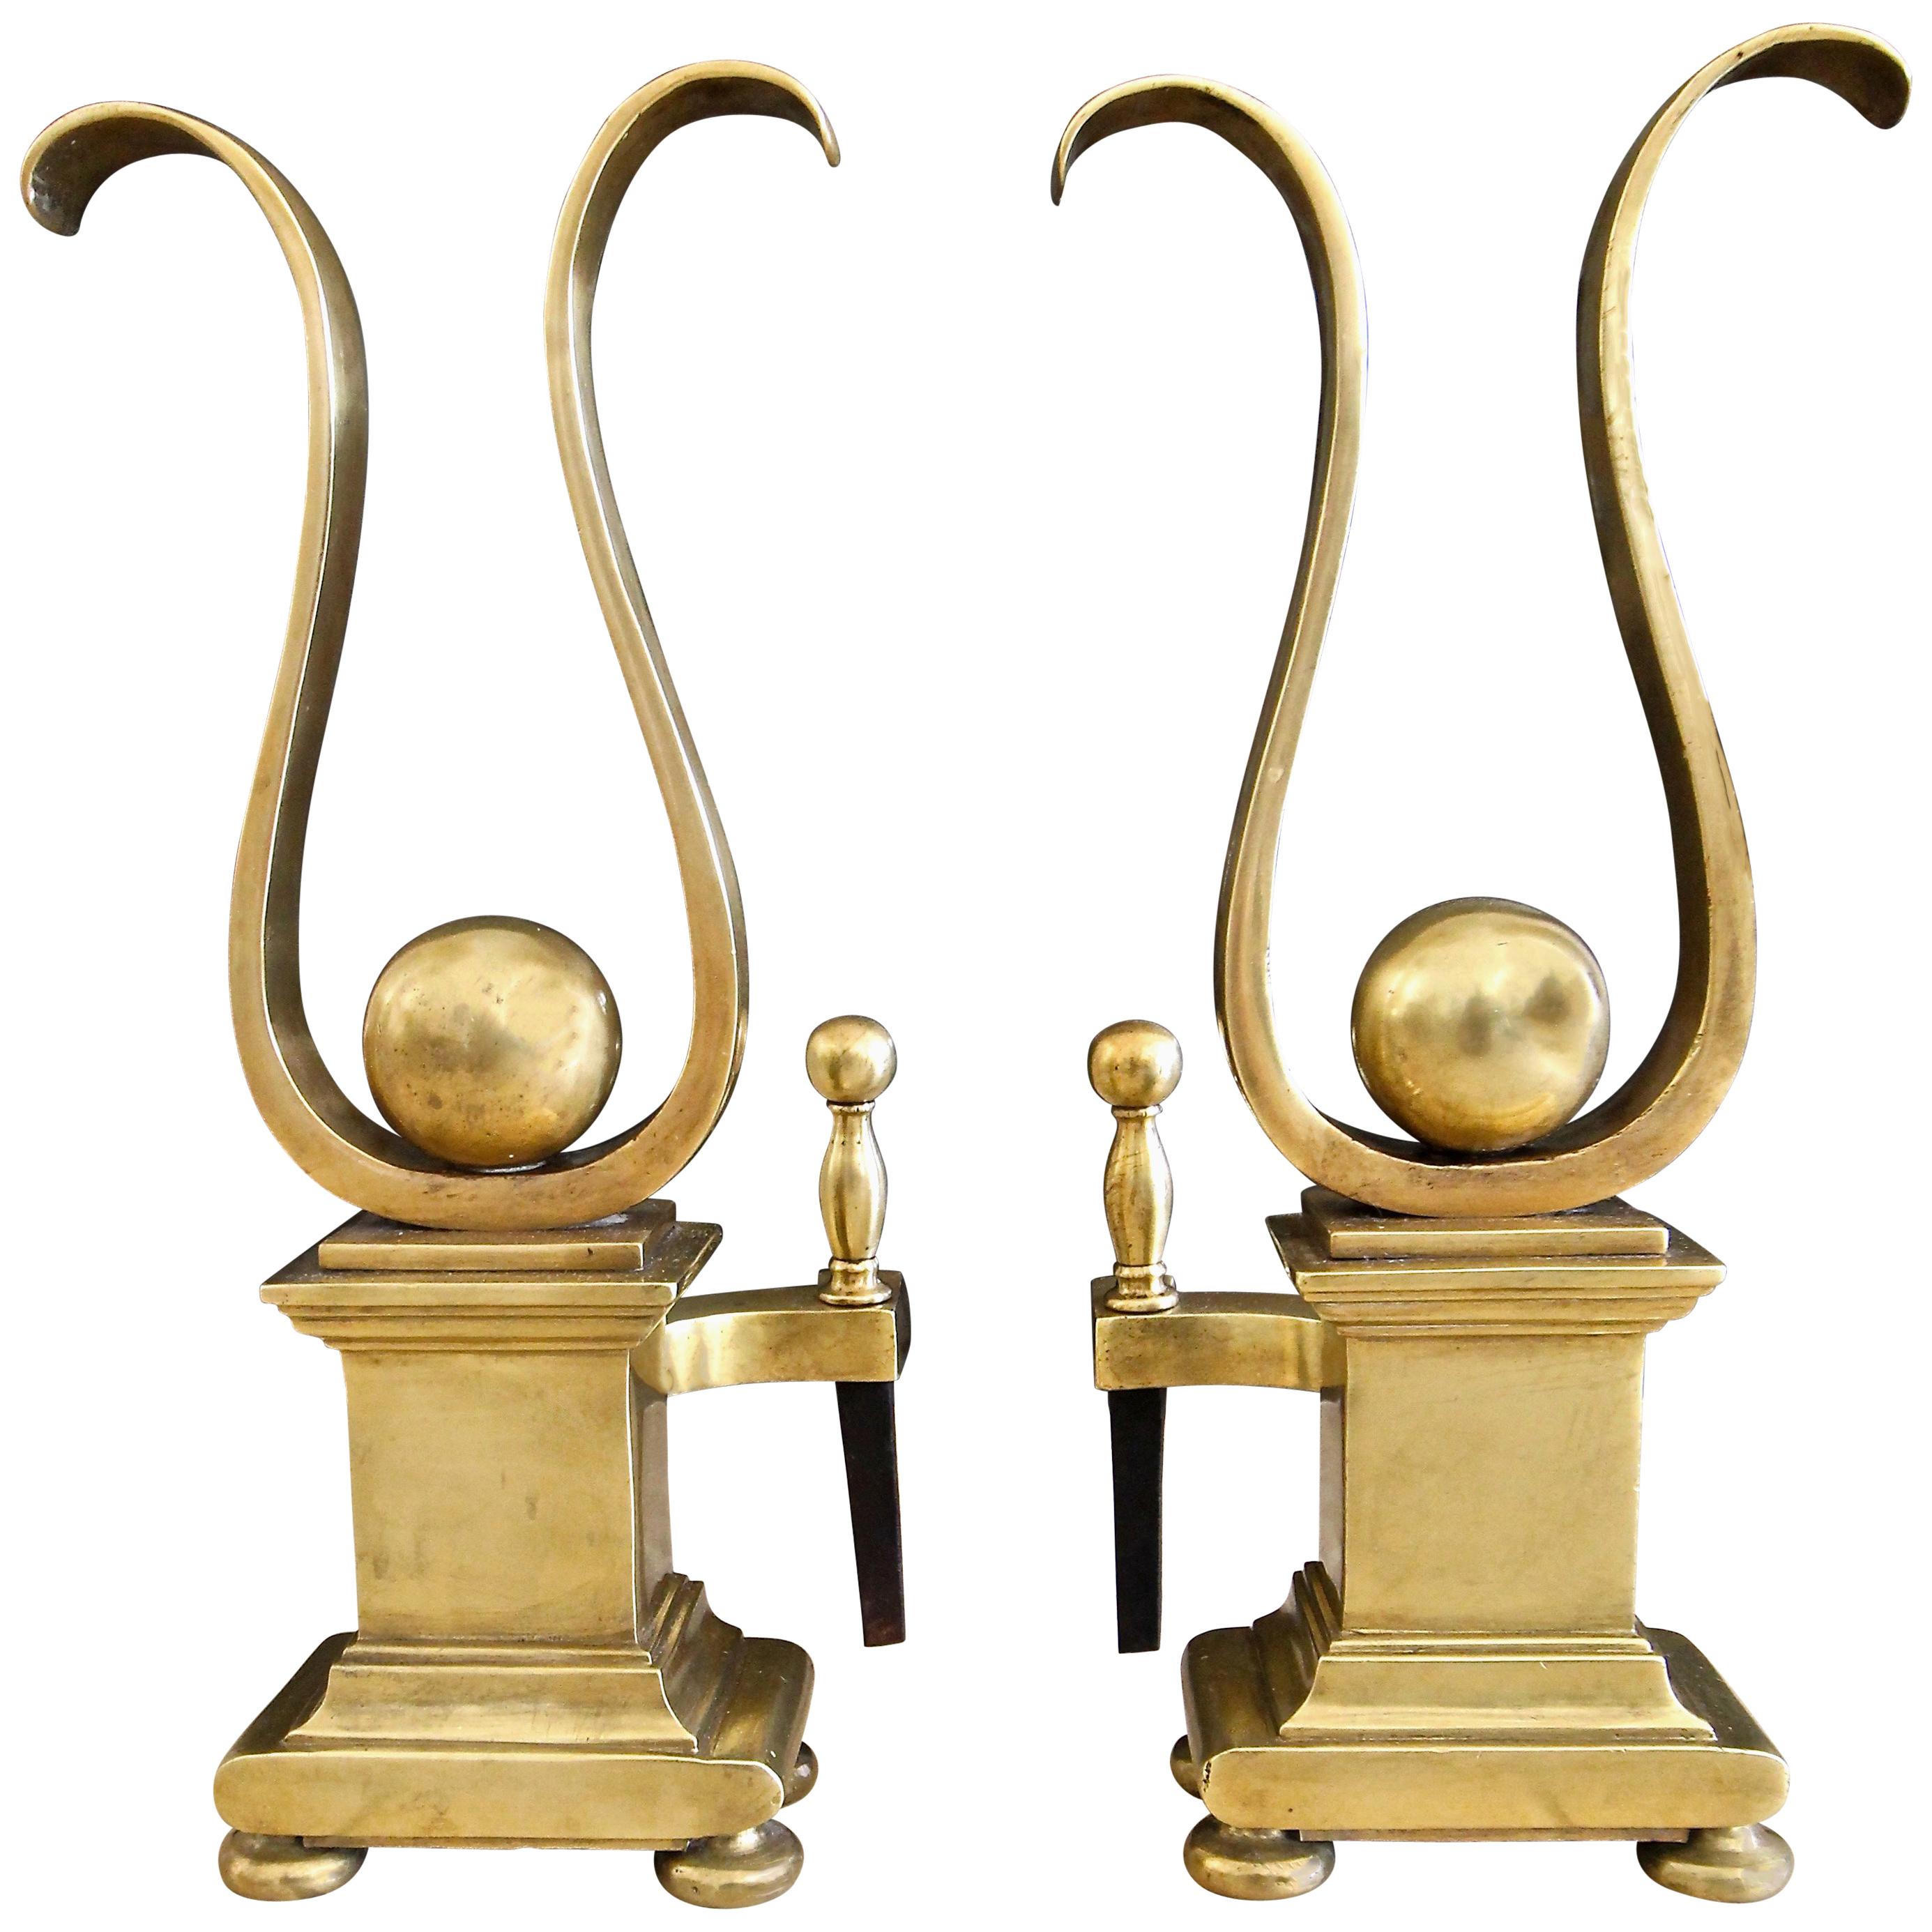 Pair of French Solid Brass Lyre Shape Andirons